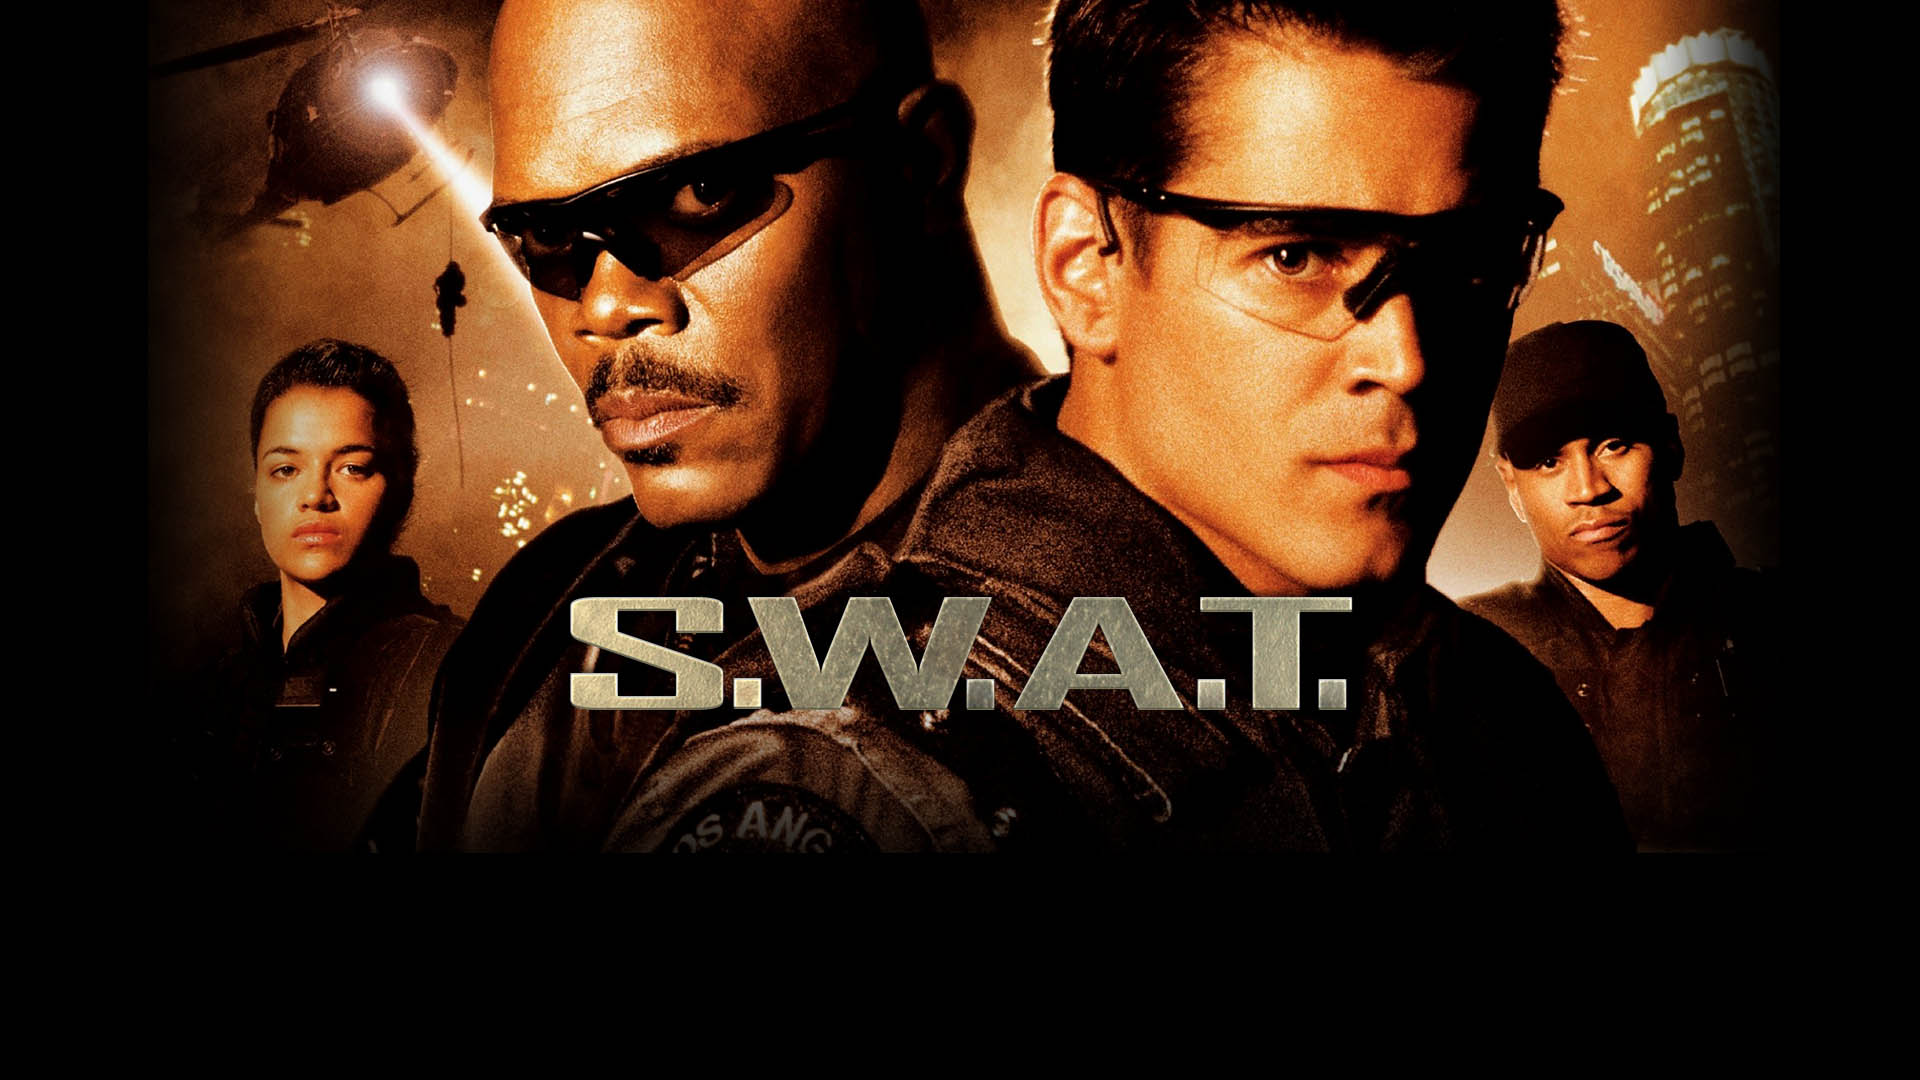 Watch S.W.A.T. Online | Stream Full Movies